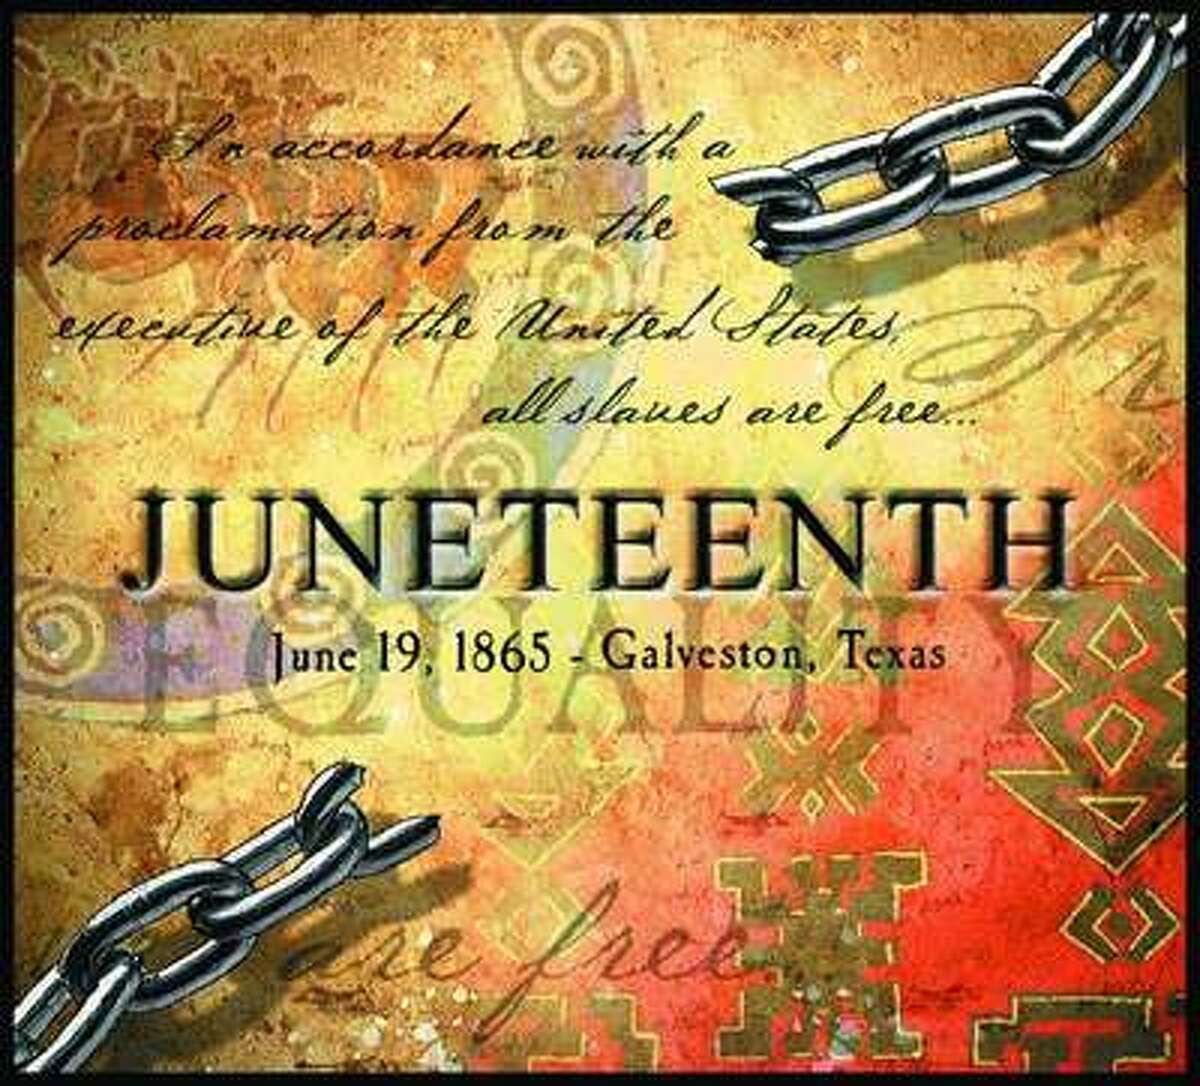 Blessed be this celebration! 
#HappyJuneteenth #LetFreedomSing